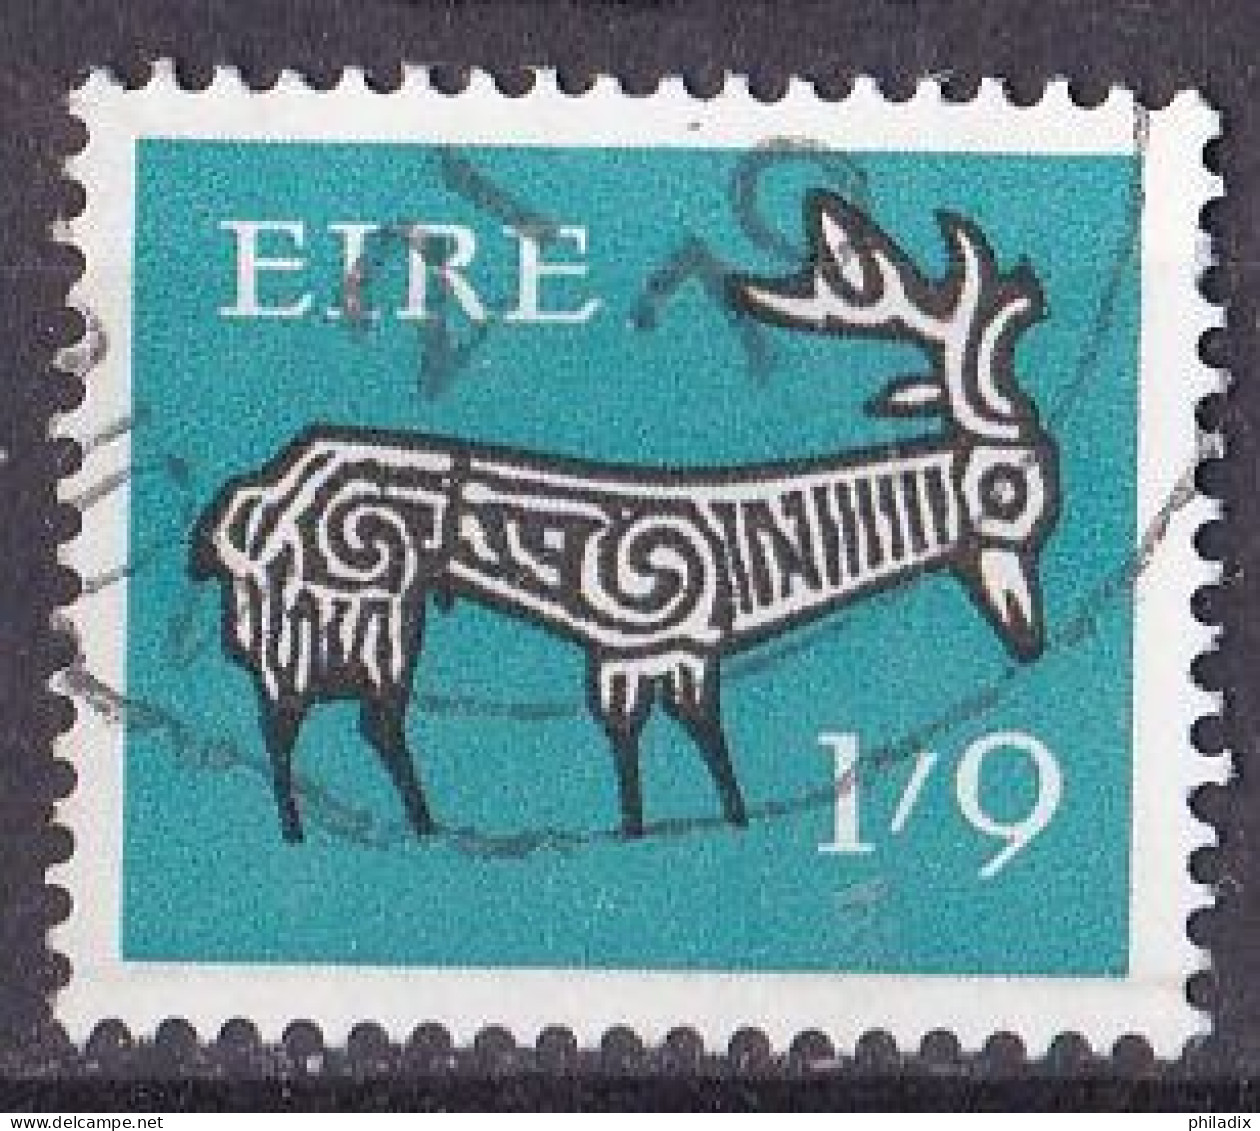 Irland Marke Von 1968/69 O/used (A5-11) - Used Stamps